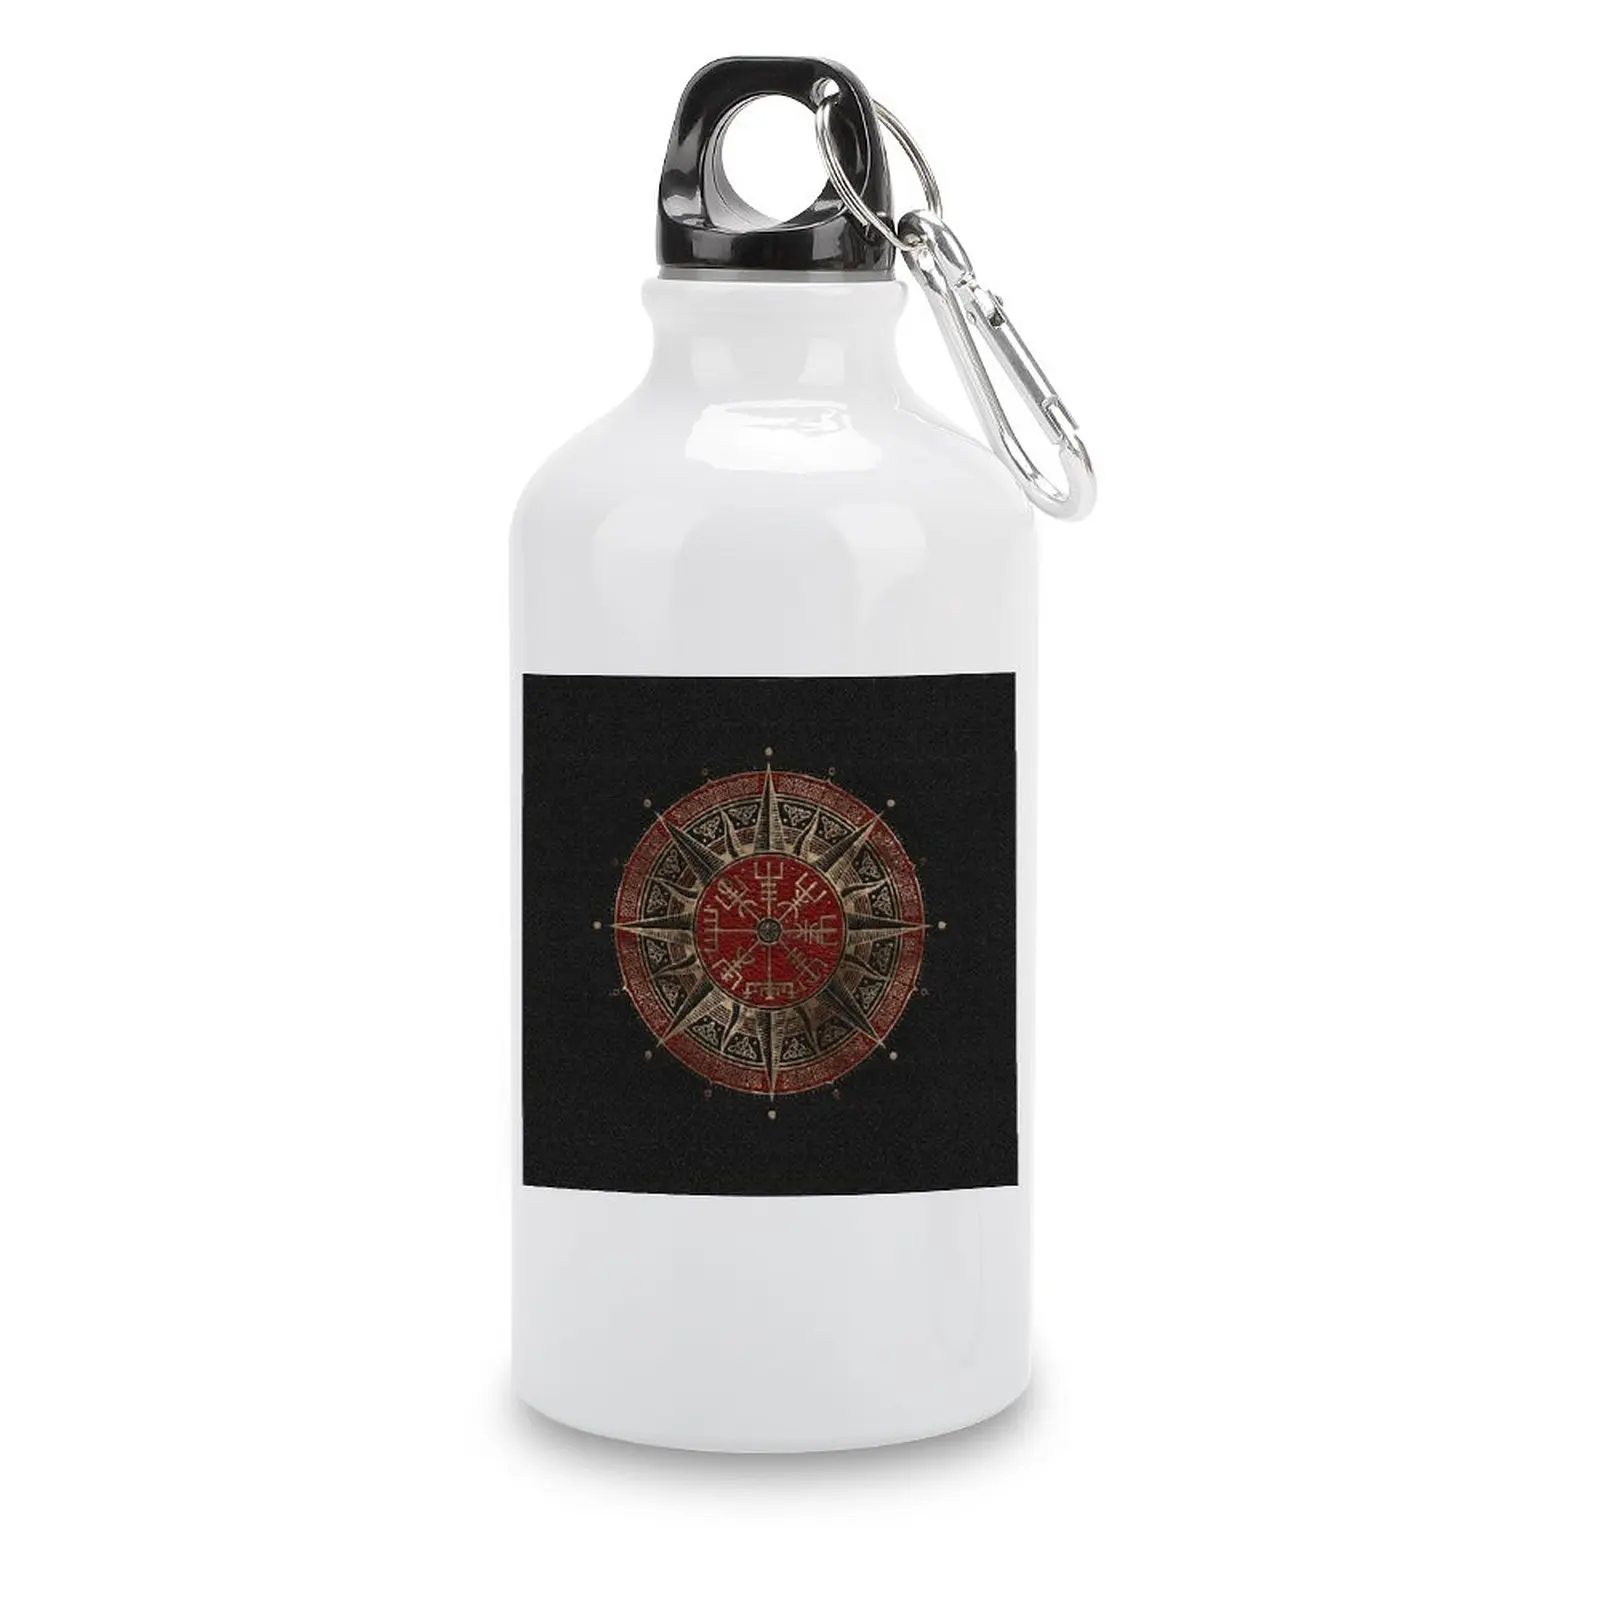 DIY  Canteen Vegvisir Viking Compass Black And Red L Sport Bottle Aluminum  Tea Cups  Thermos Bottle Novelty Humor Graphic Kettl